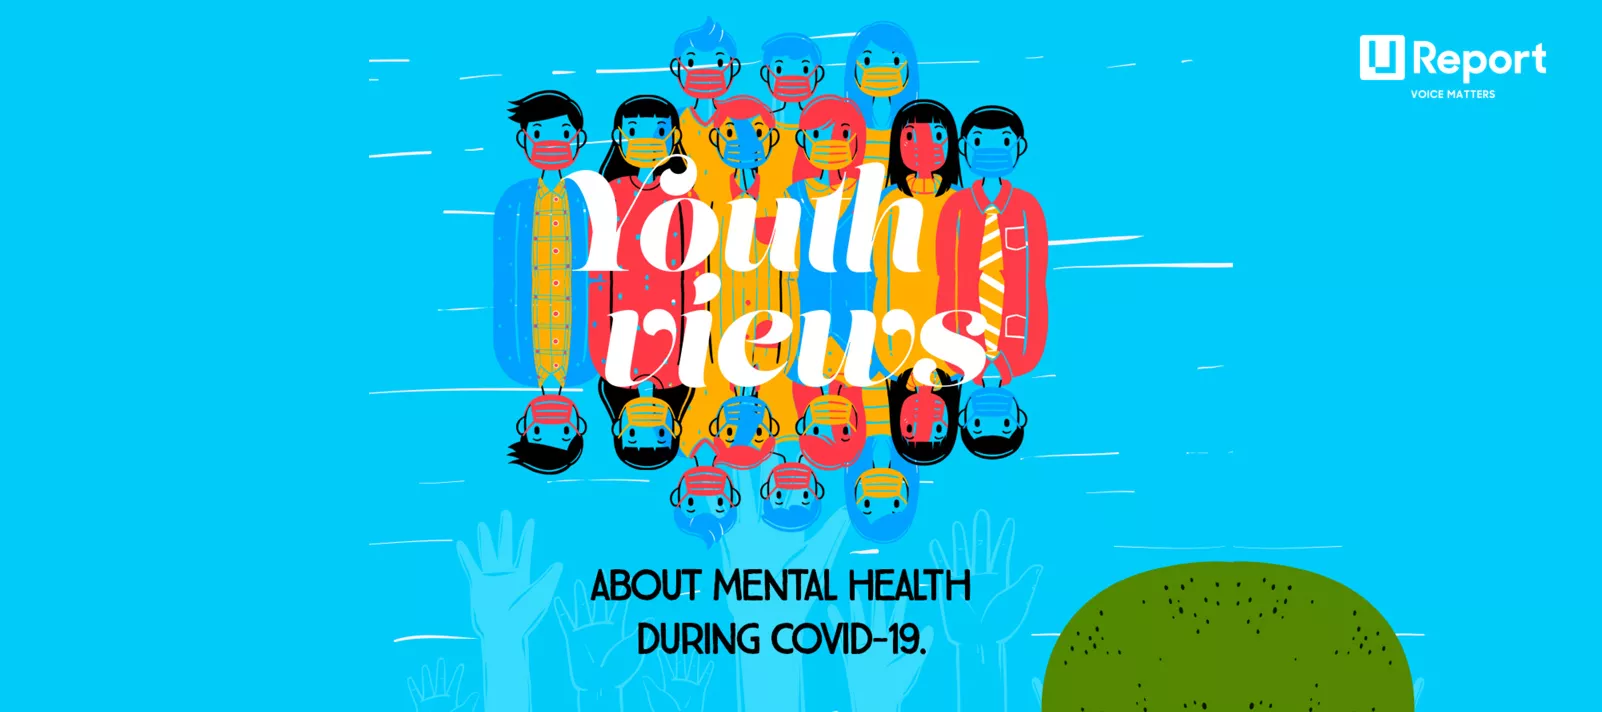 About mental health during COVID-19